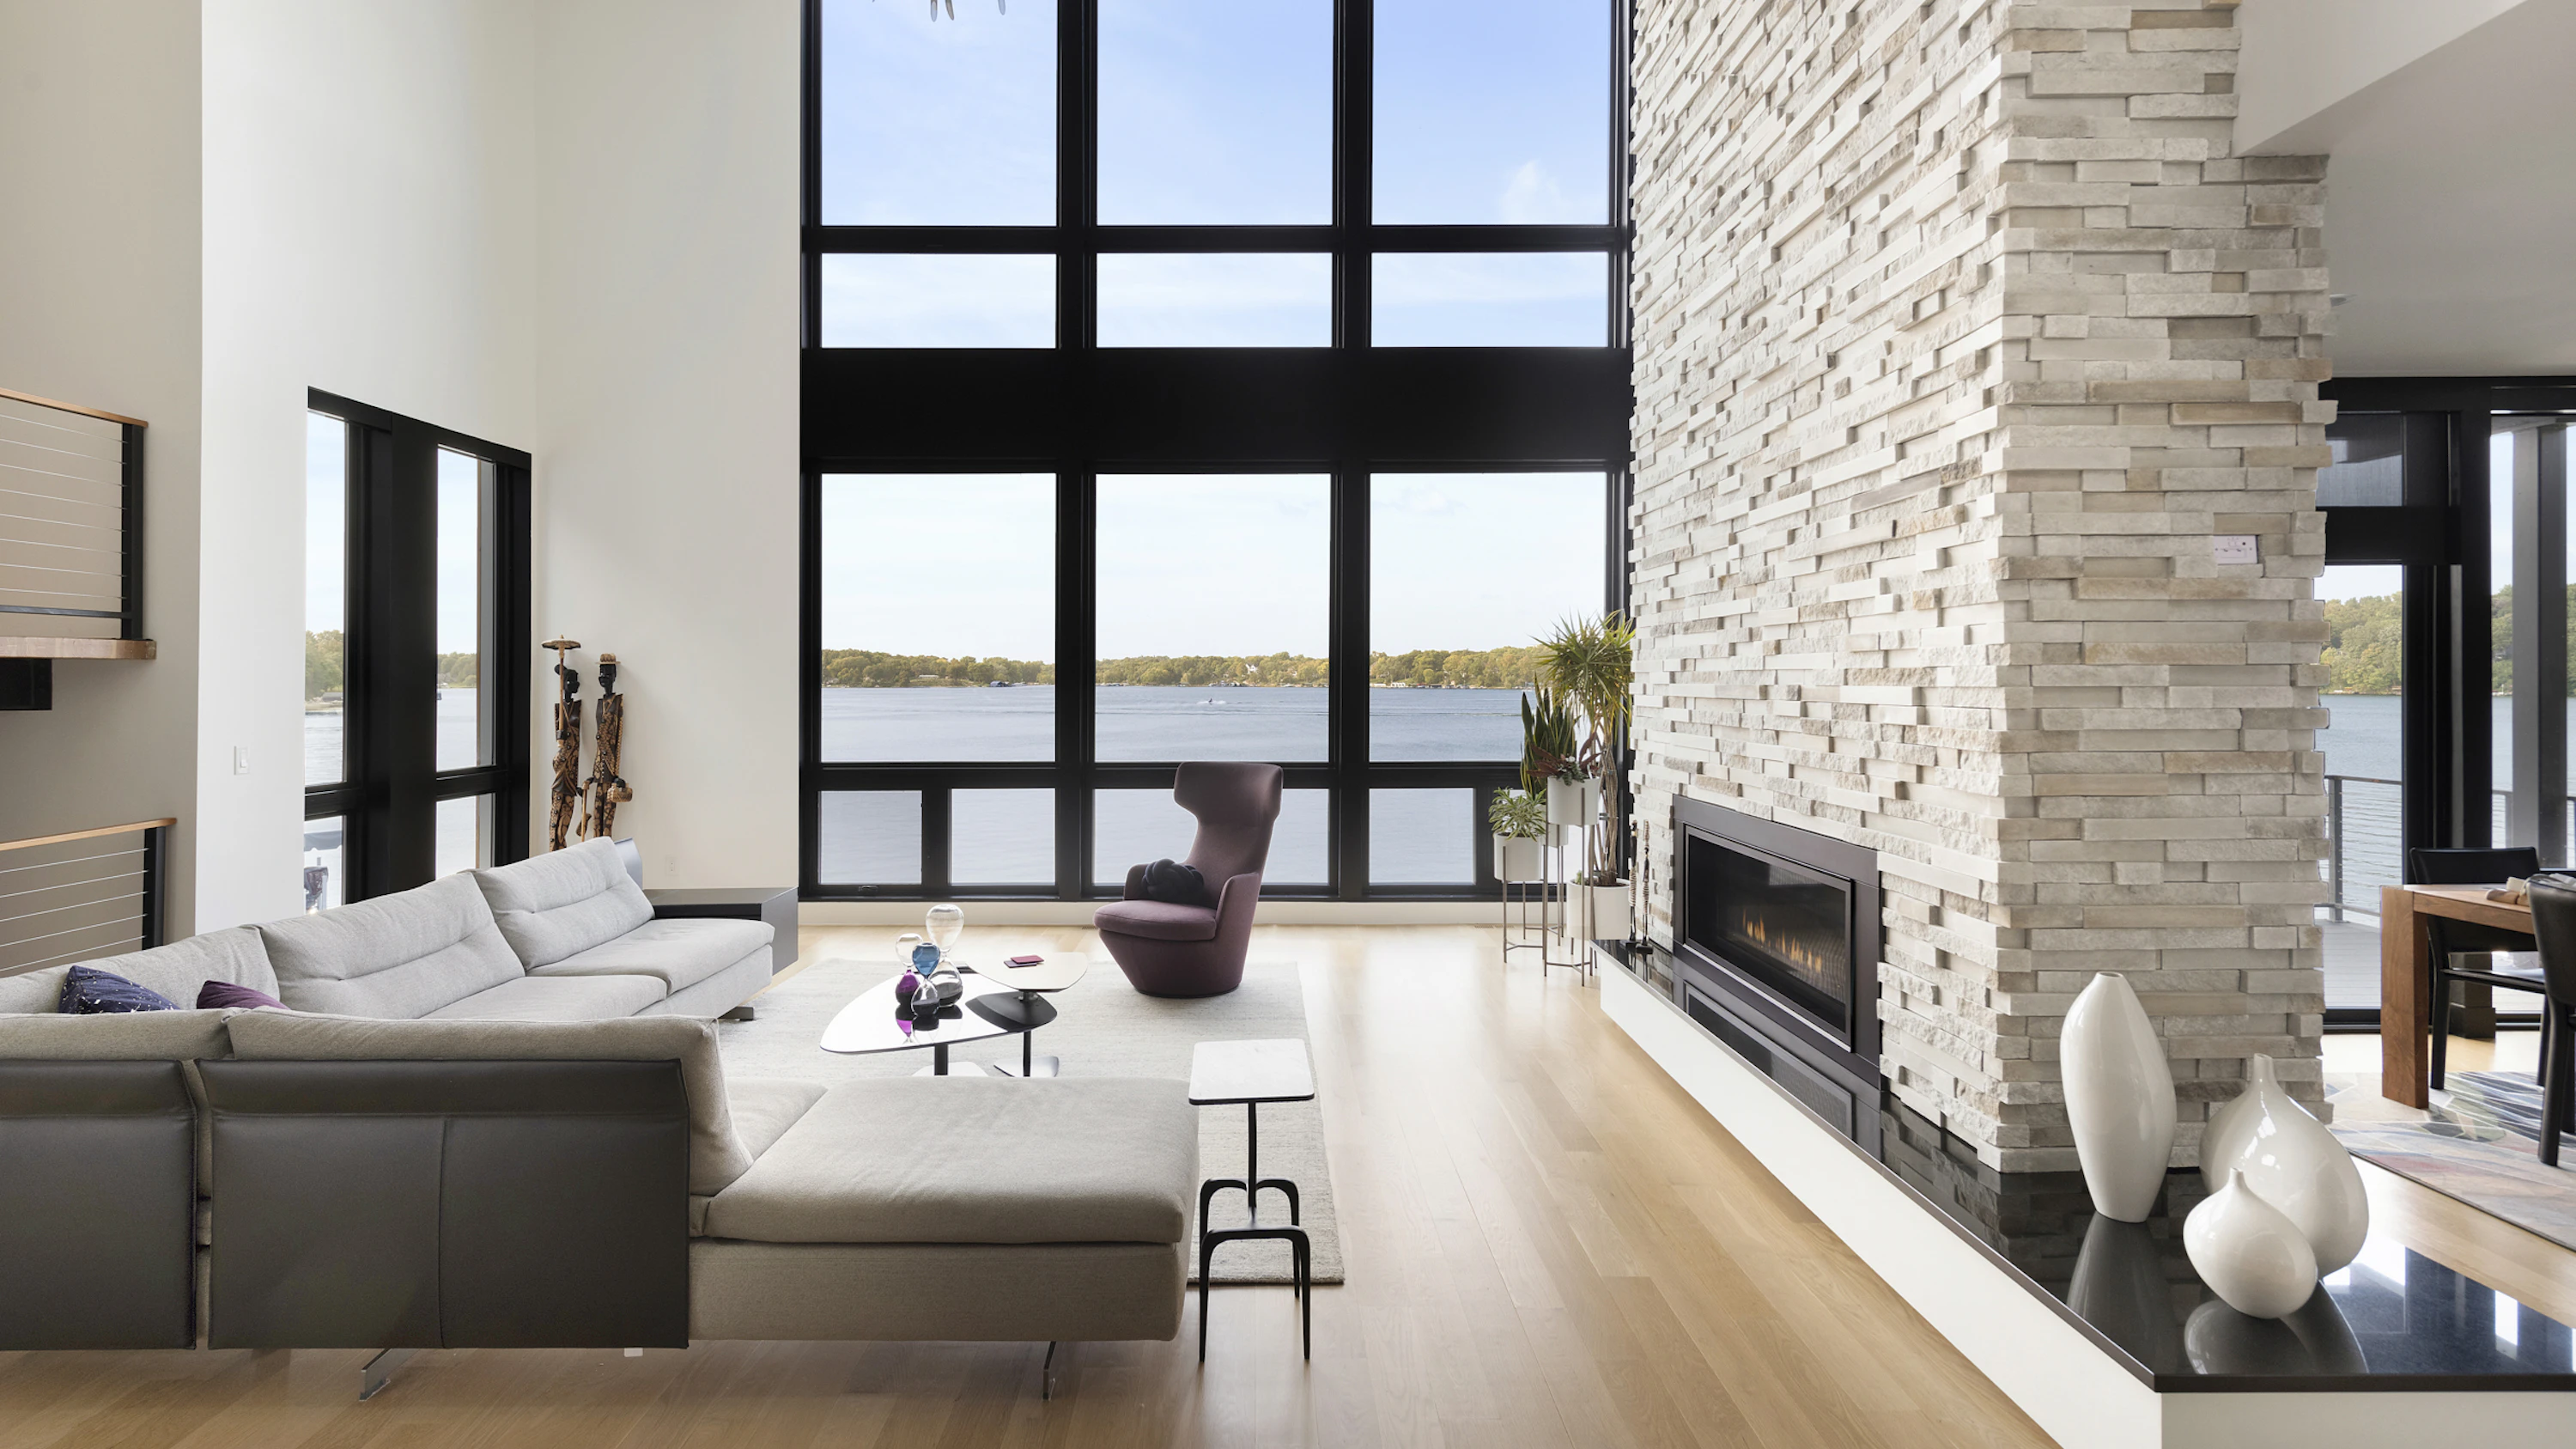 Expansive two-story views from the living room